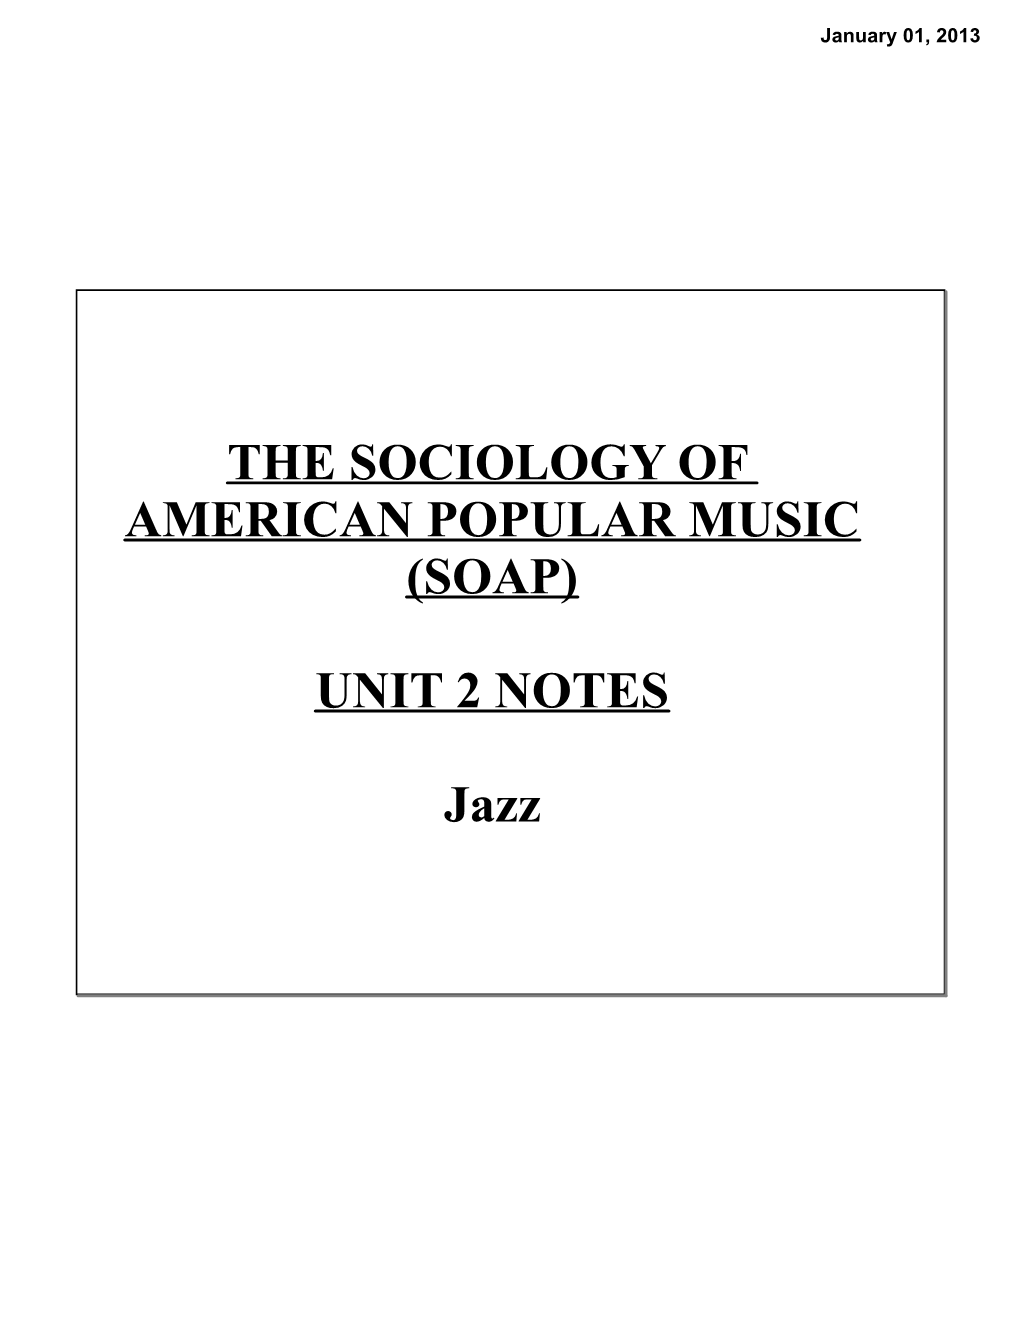 The Sociology of American Popular Music (Soap) Unit 2